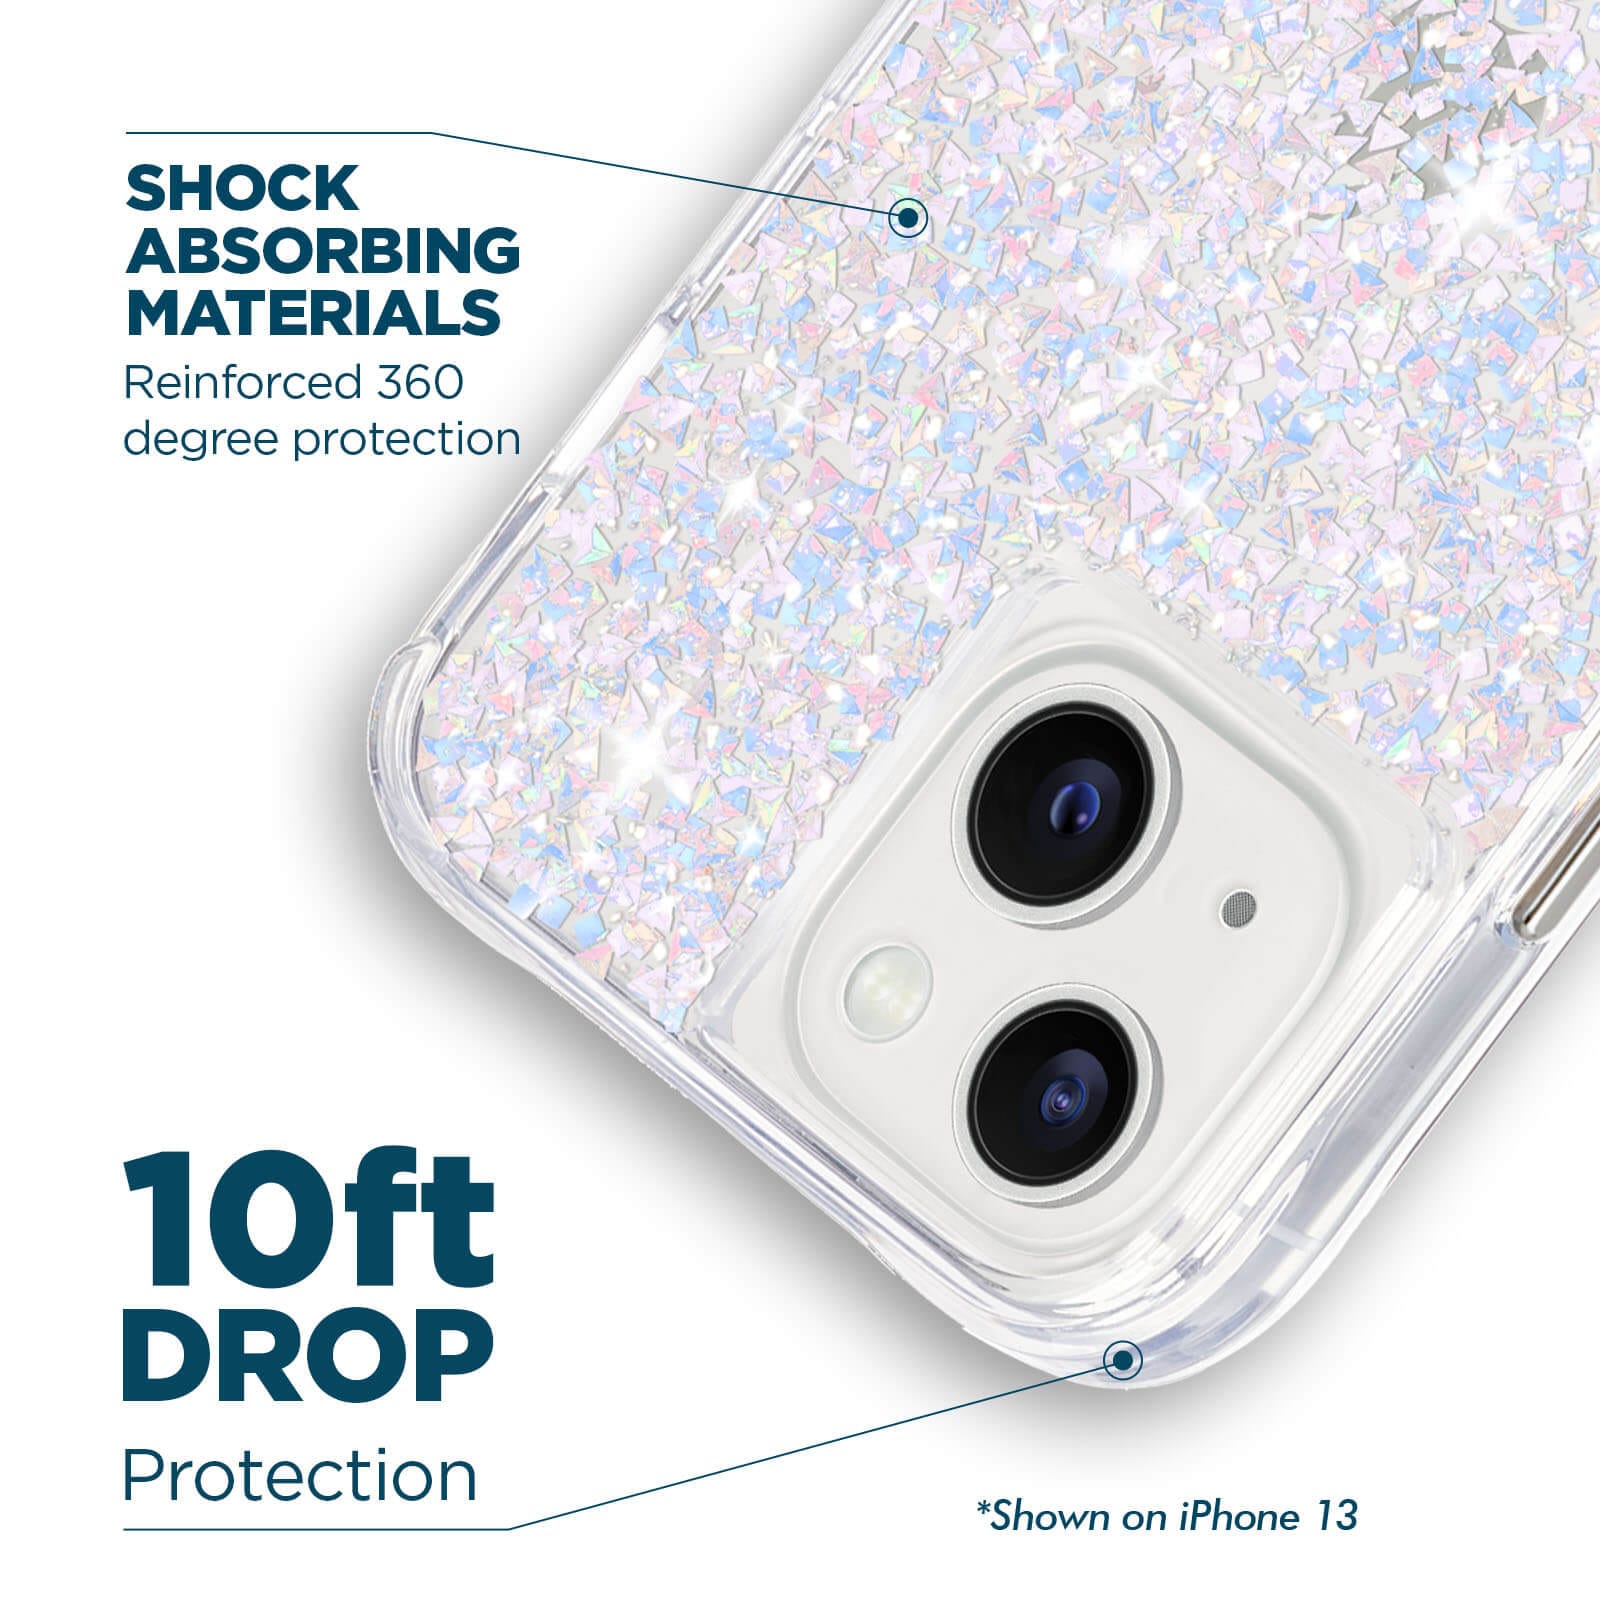 Shock absorbing materials reinforce 360 degree protection. 10ft drop protection. *Shown o. iPhone 13. color::Twinkle Diamond